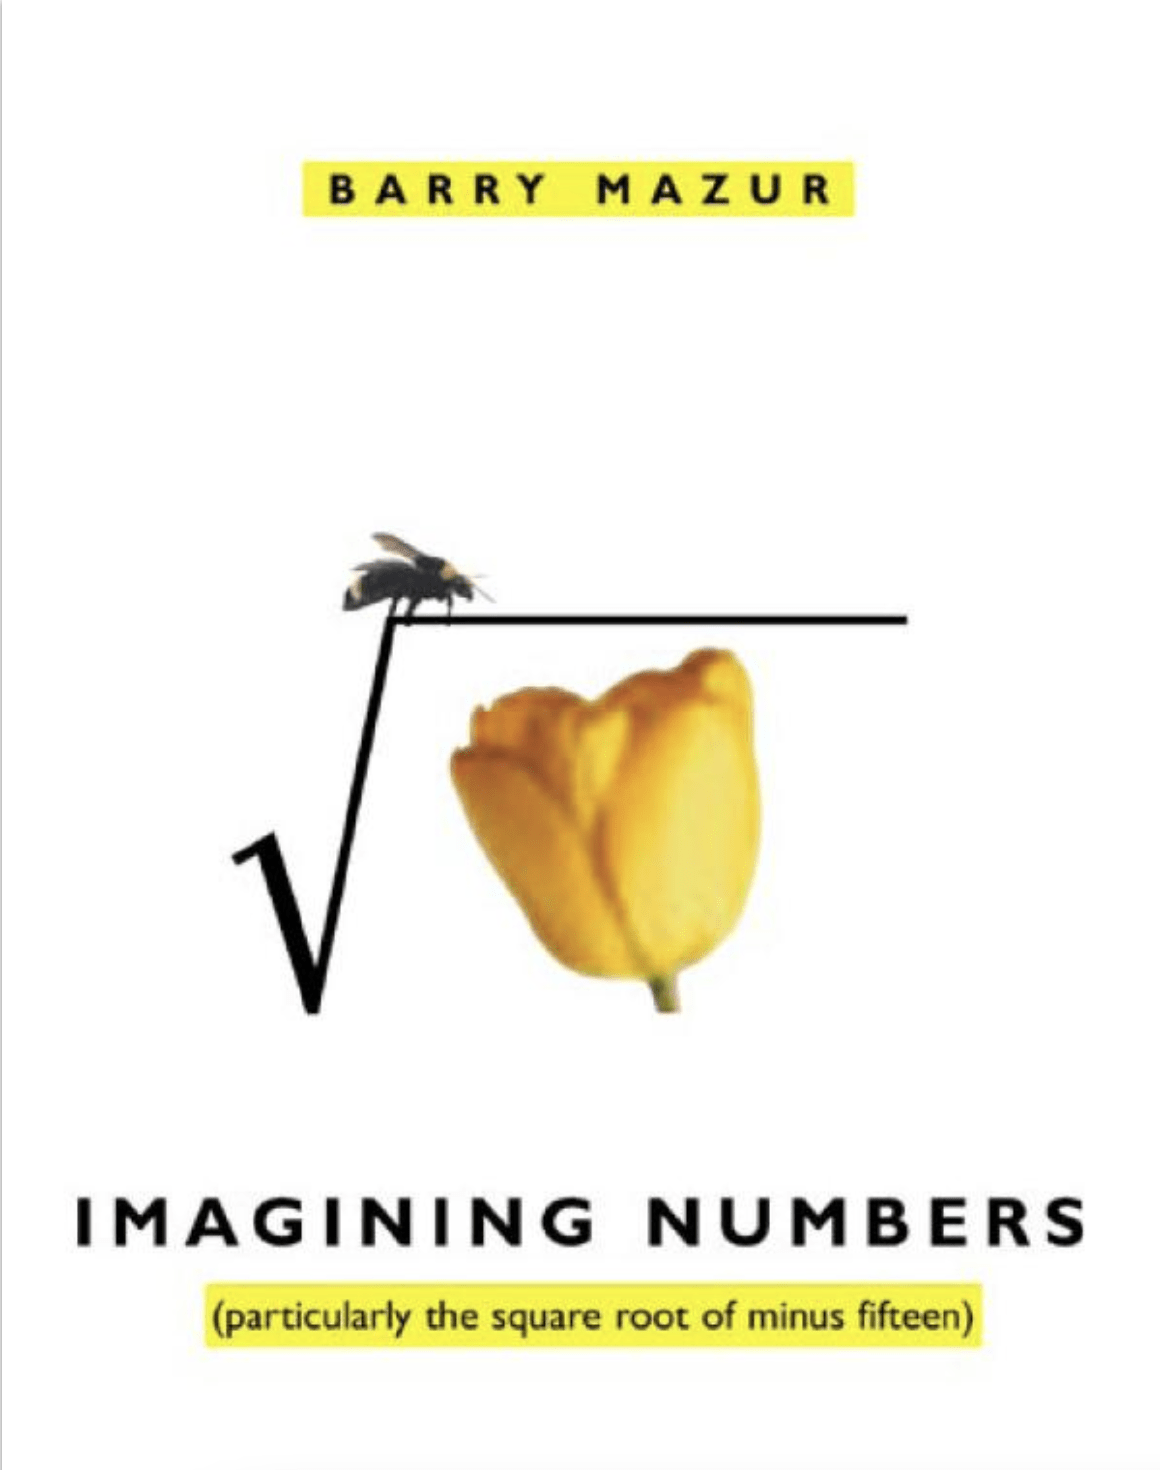 Cover of Imagining Numbers book by Barry Mazur.